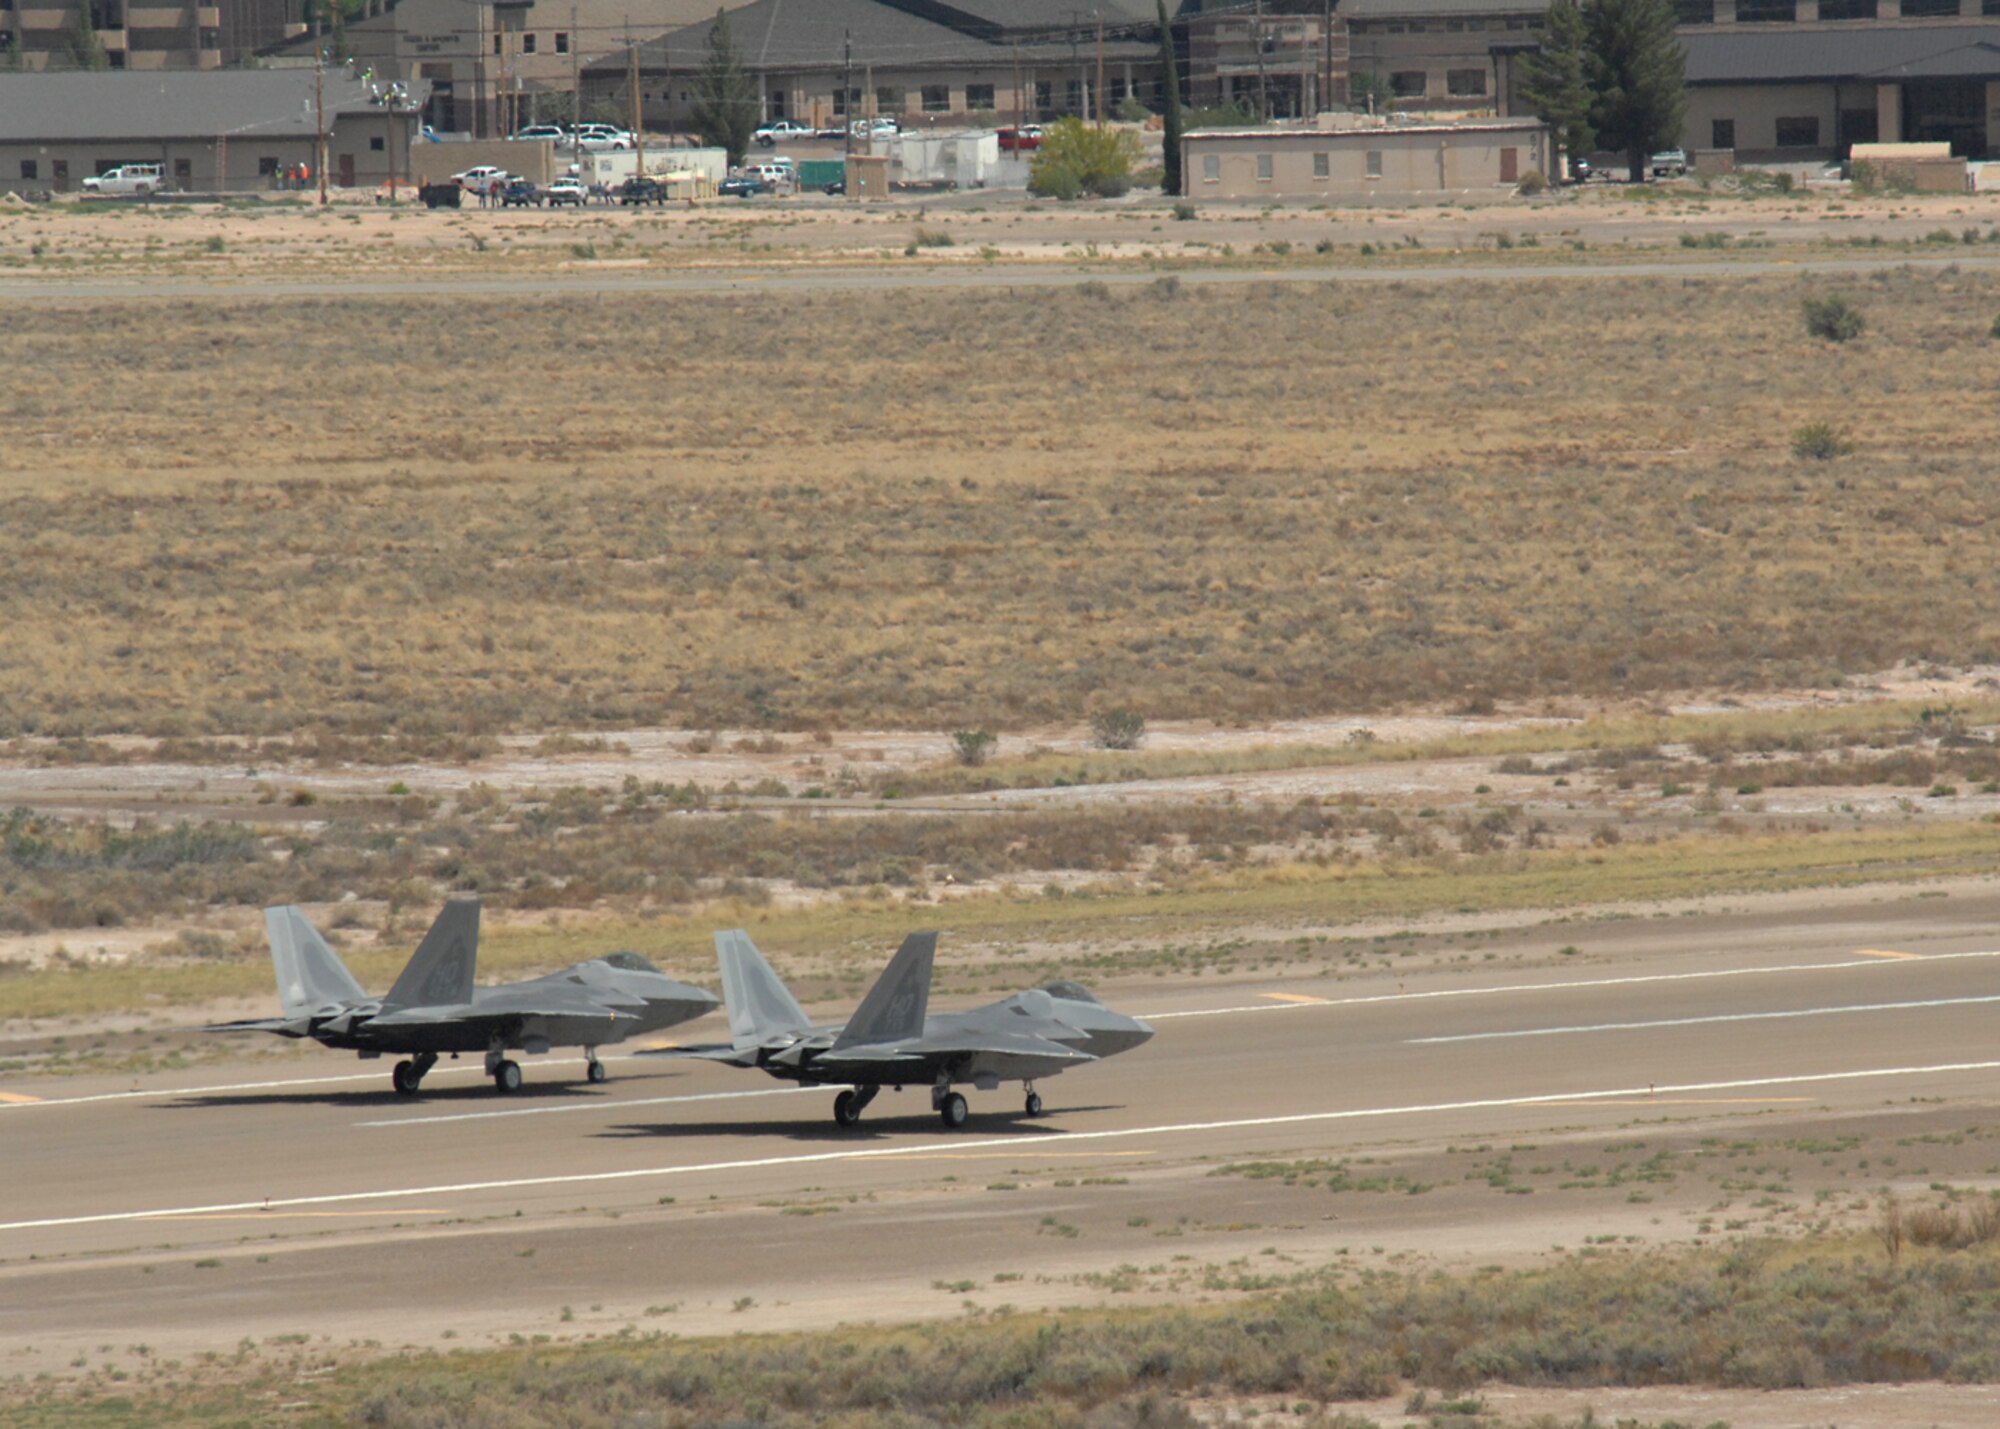 Col. Jeff Harrigian, 49th Fighter Wing commander, and Lt. Col. Mike Hernandez, 7th Fighter Squadron commander, taxi a pair of F-22A Raptors at Holloman Air Force Base, N.M., June 2. The jets are the first two Holloman-tailed F-22s to arrive on base. Prior to landing, the jets flew over the Tularosa Basin, allowing the local community a chance to witness the future of Holloman. (U.S. Air Force photo/Senior Airman Tiffany Trojca)